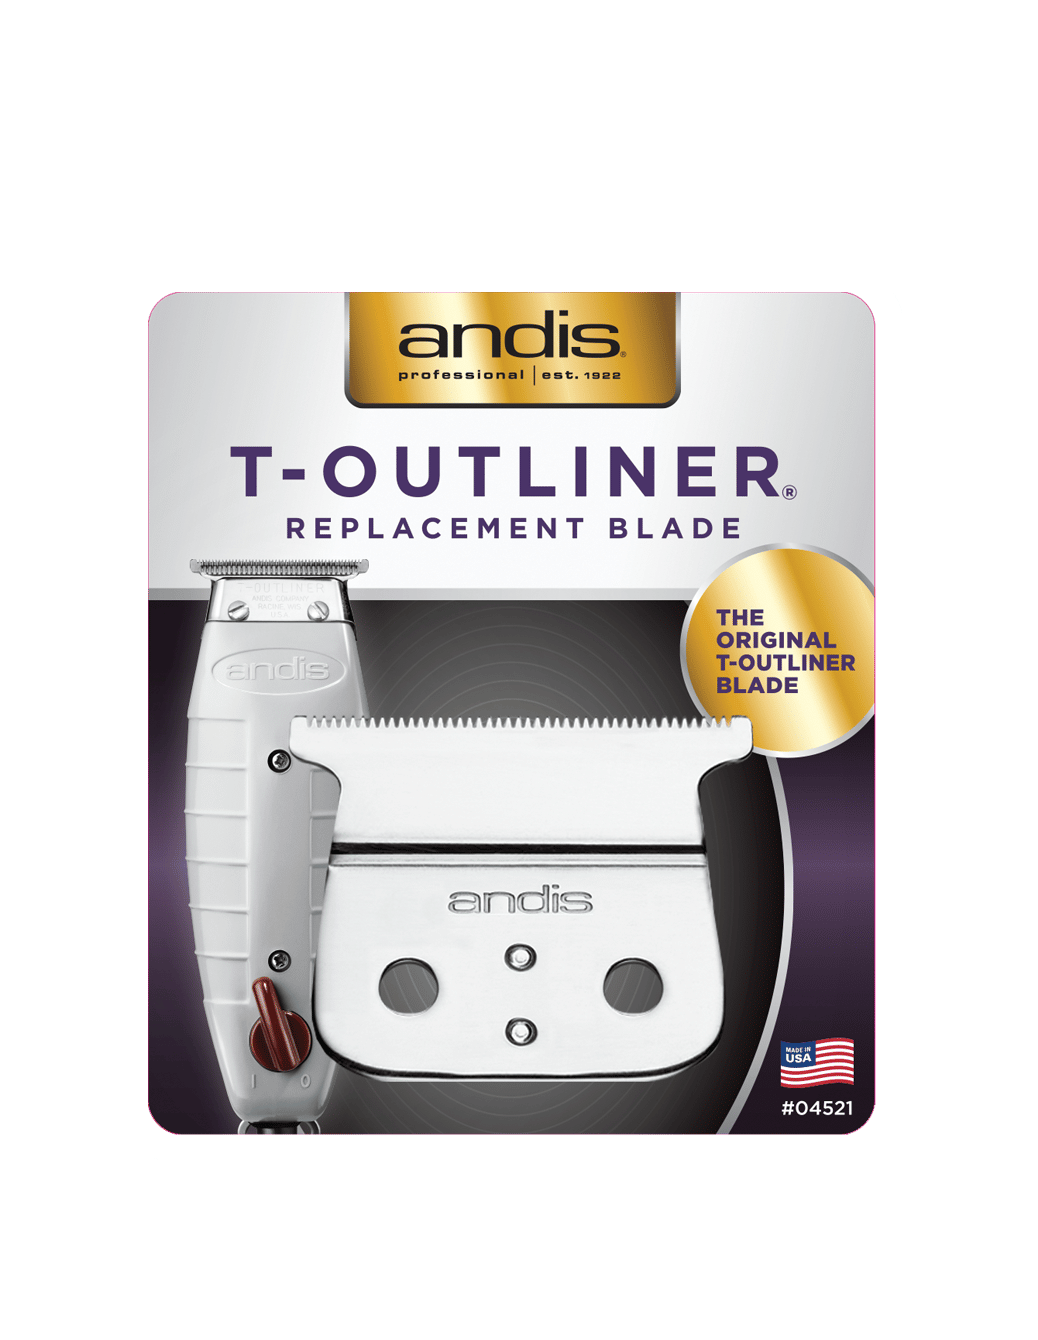 andis outliner